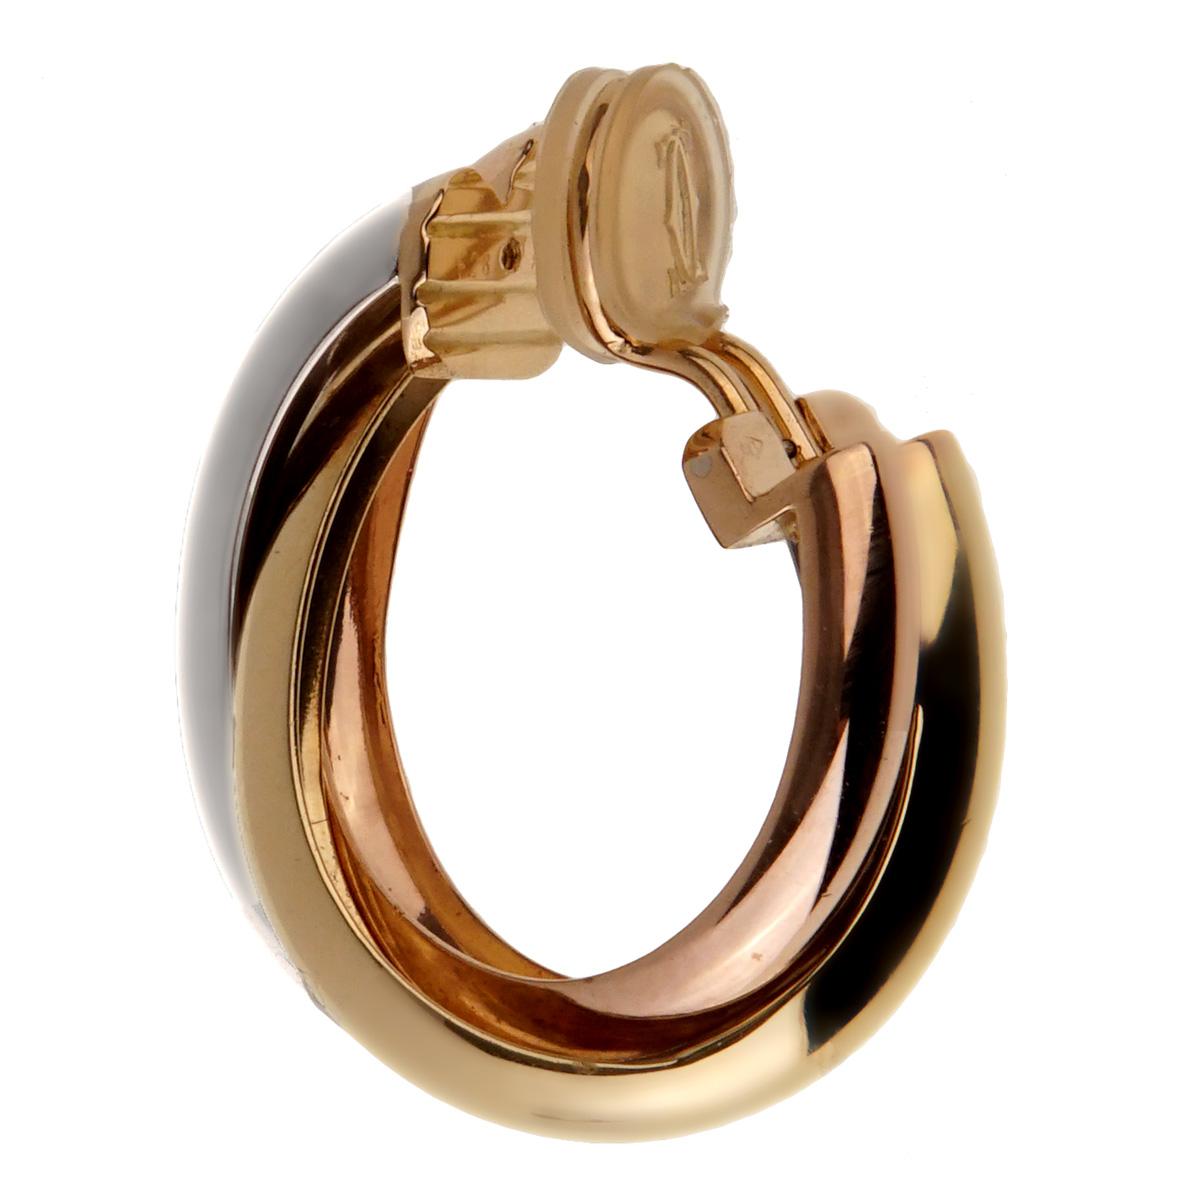 An iconic pair of Cartier Trinity Hoop earrings featuring white yellow and rose gold. The earrings measures 1.18